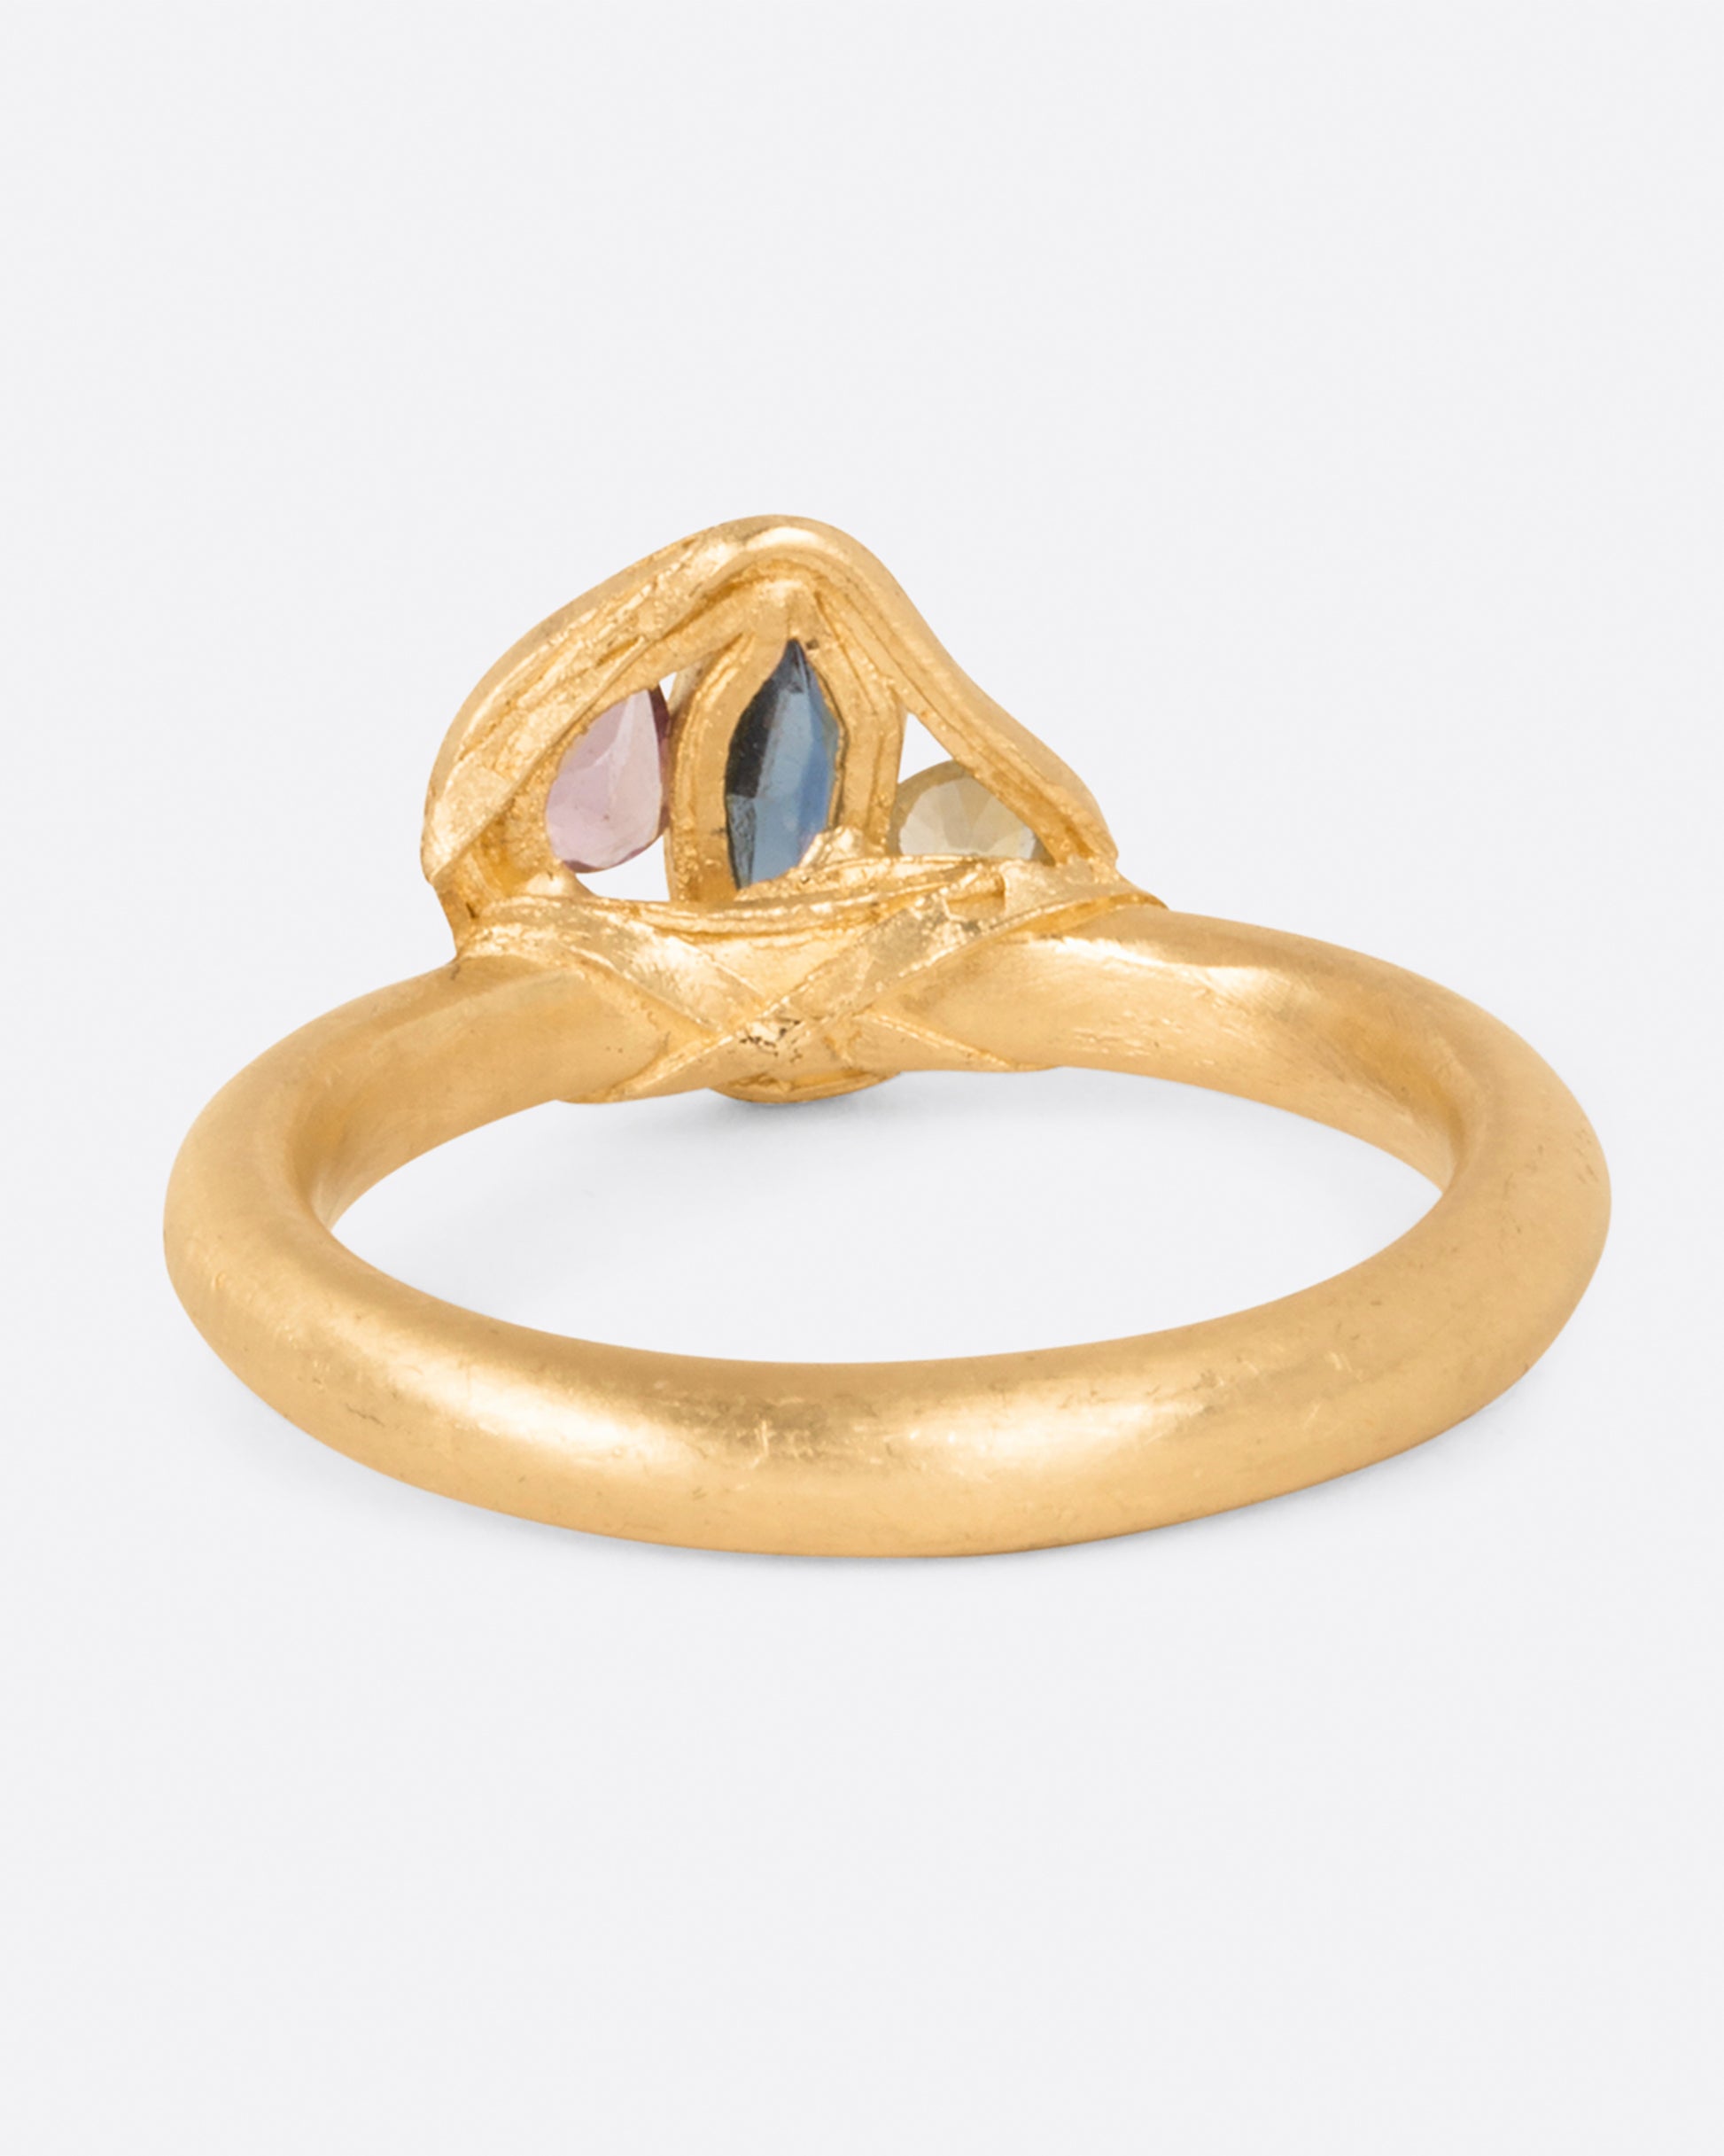 Three sapphires wrapped in yellow gold; one yellow, one pink, and one blue.